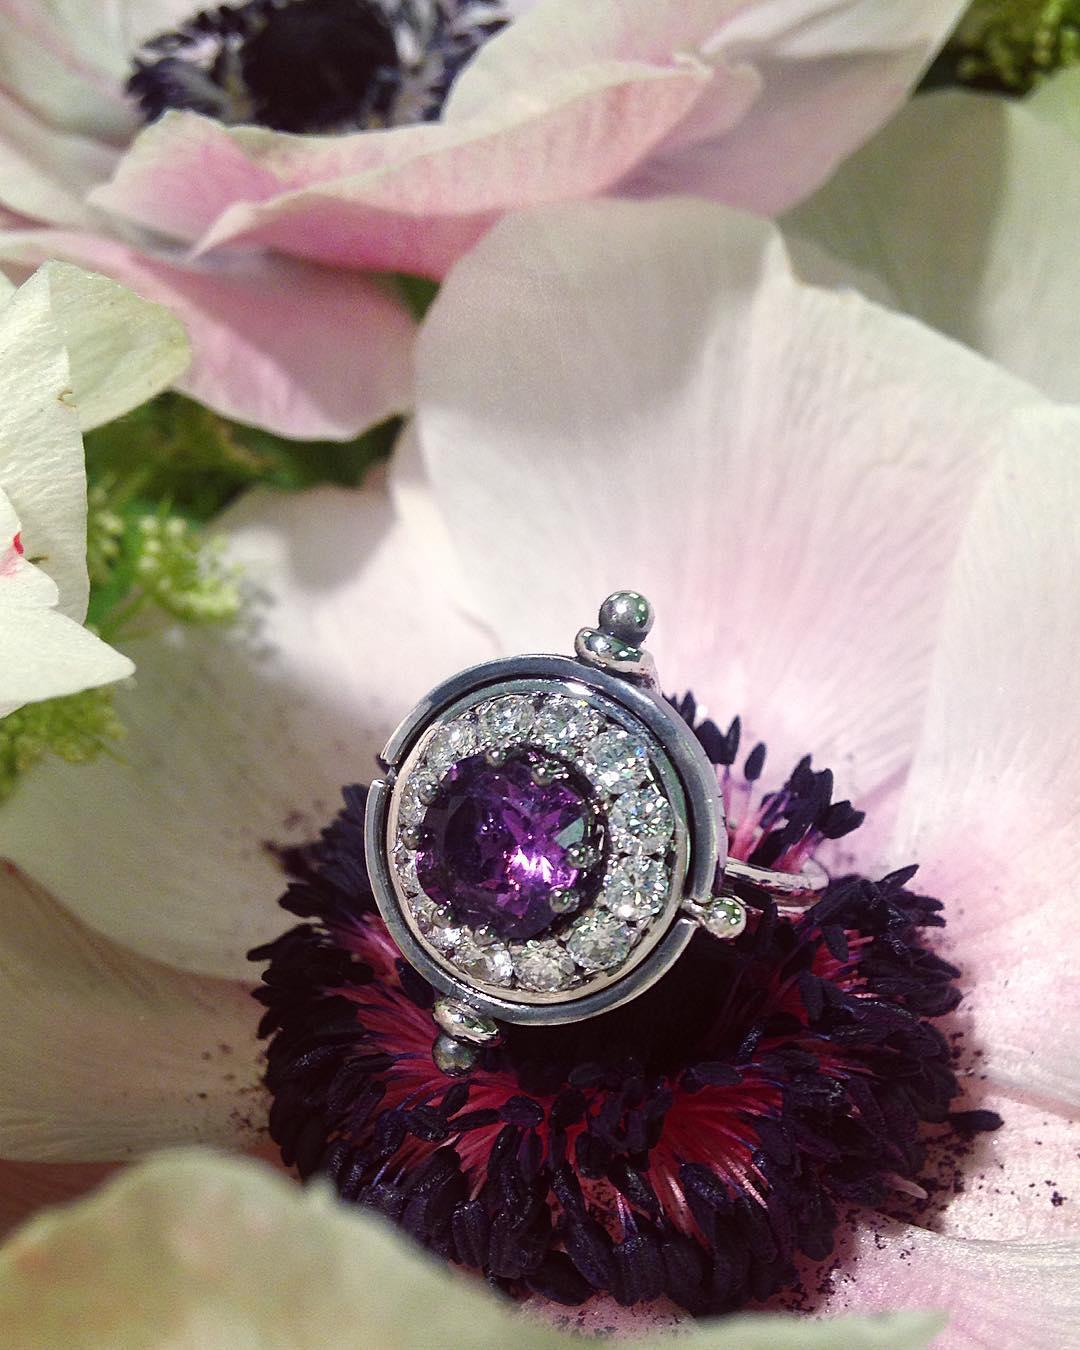 Cushion Cut Diamonds Amethyst Mira Ring in 18k white gold by Elie Top